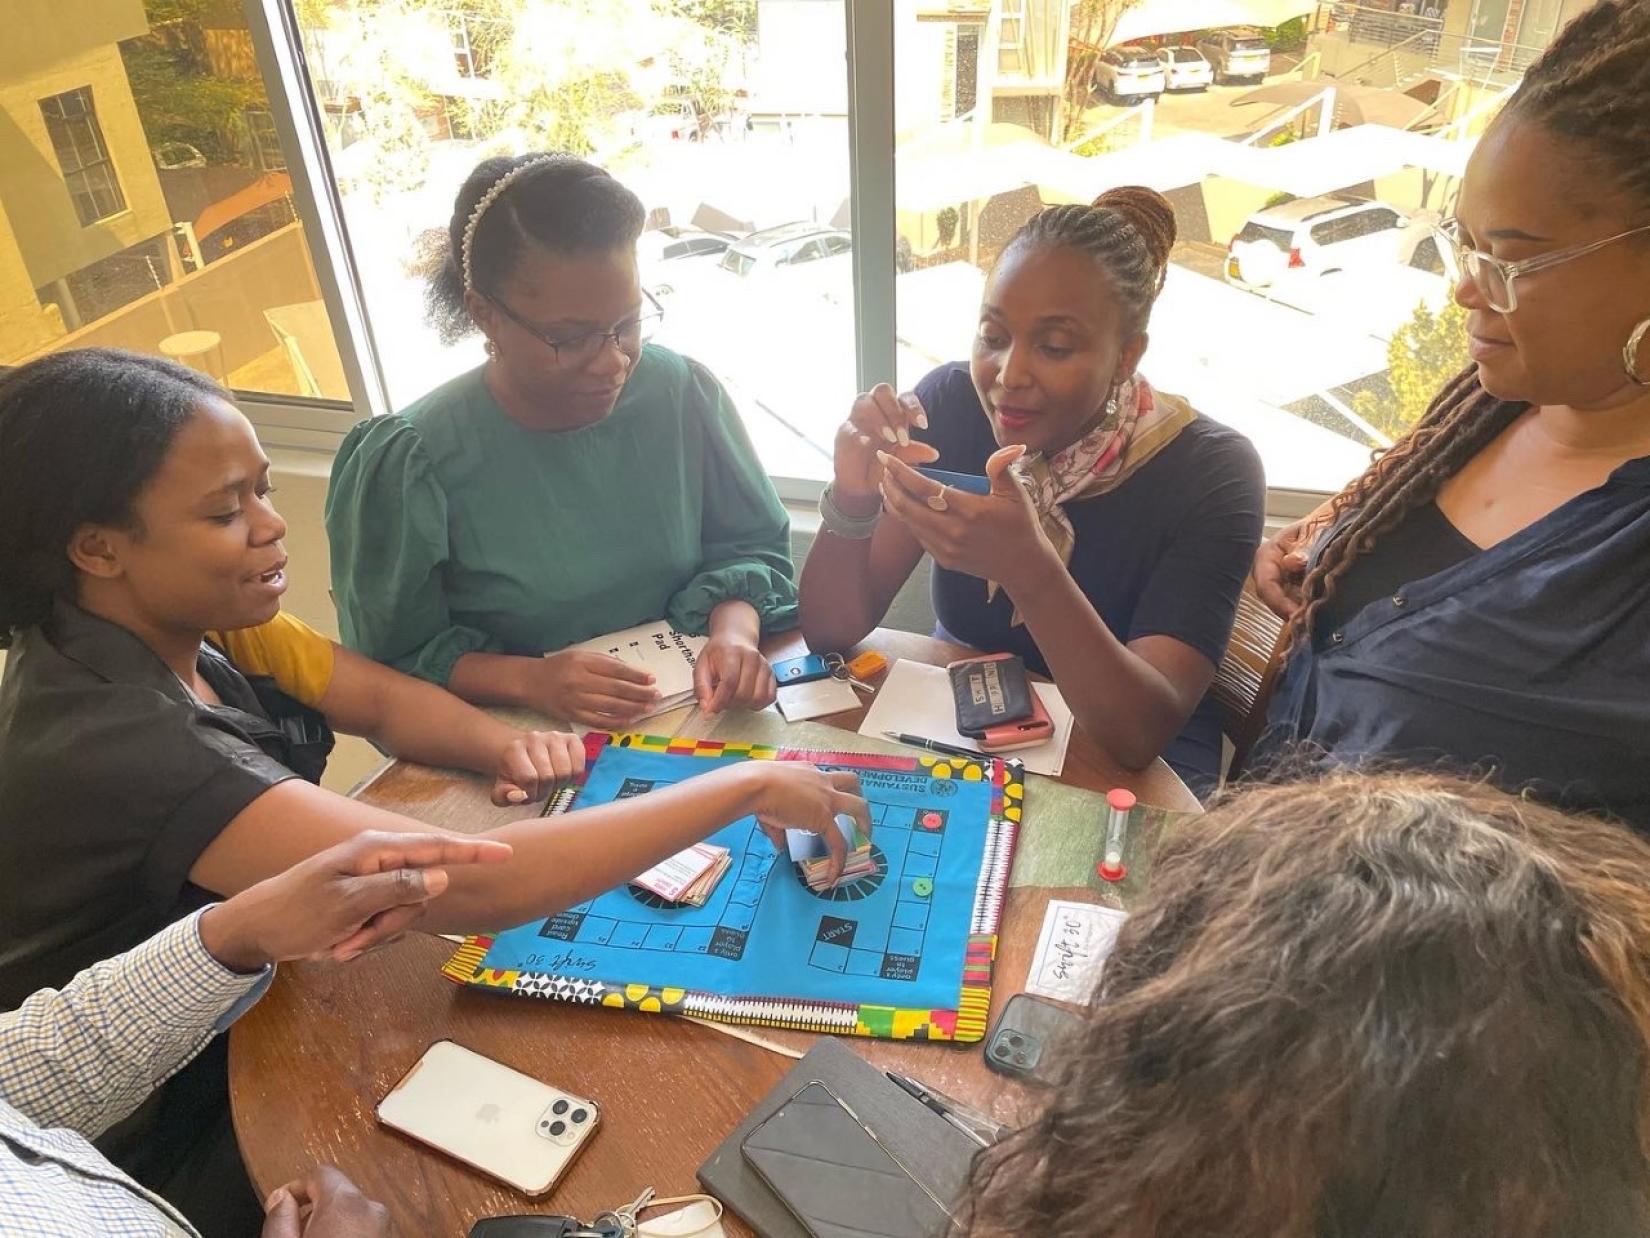 The board game provides a meaningful way to learn about the SDGs. NamibRe staff were fully engaged to the fun learning.